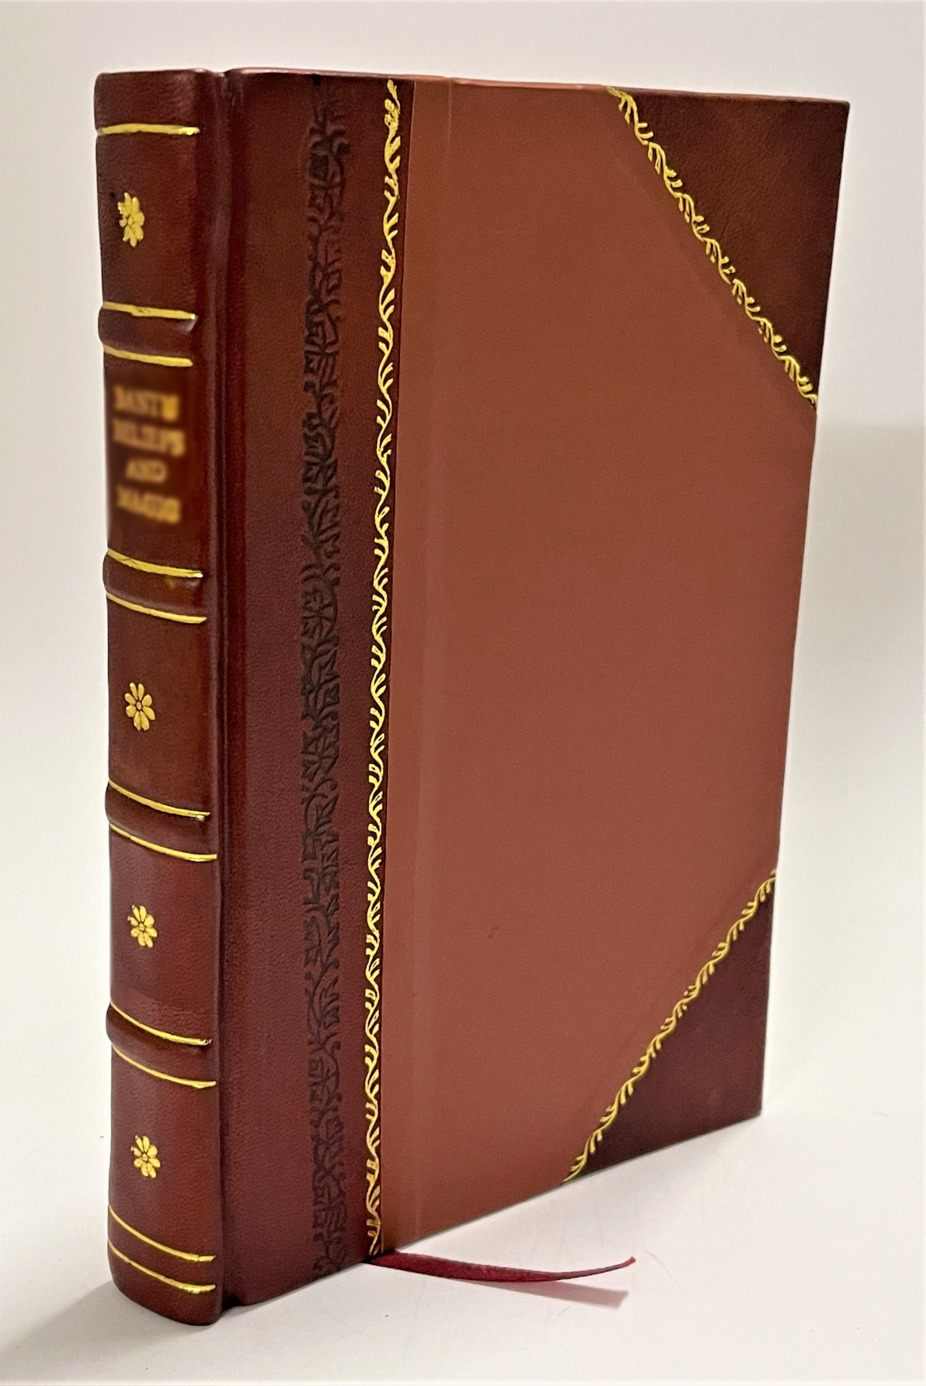 The simplicity of life, an introductory chapter to pathology / Ralph Richardson (1873) [Leather Bound] - image 1 of 1